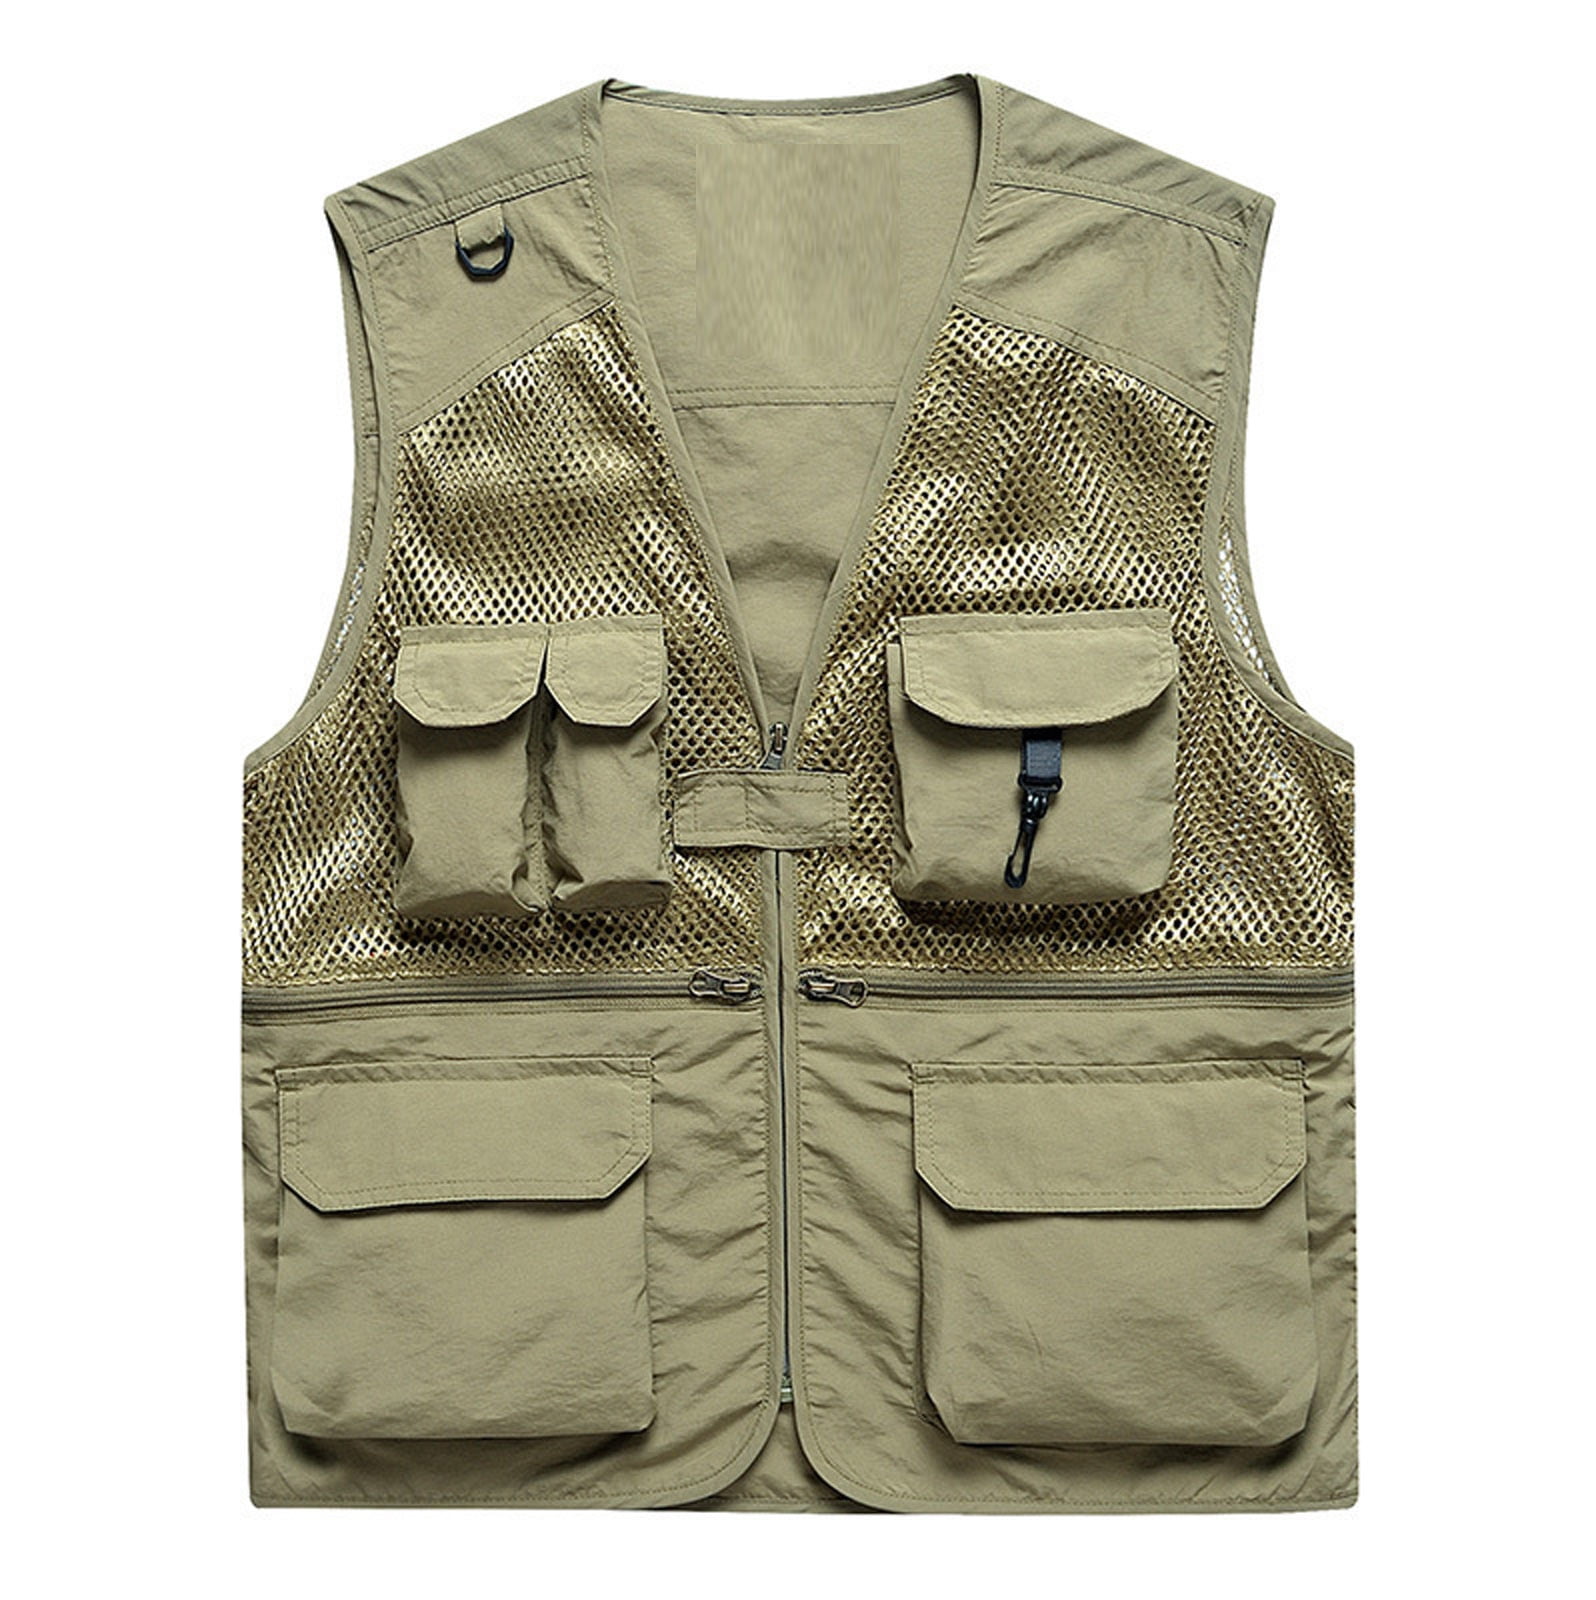 Wyongtao Hunting Vests for Men's Quick-drying Work Fishing Vests  Lightweight Travel Waistcoat with Multi-Pockets,Khaki XL